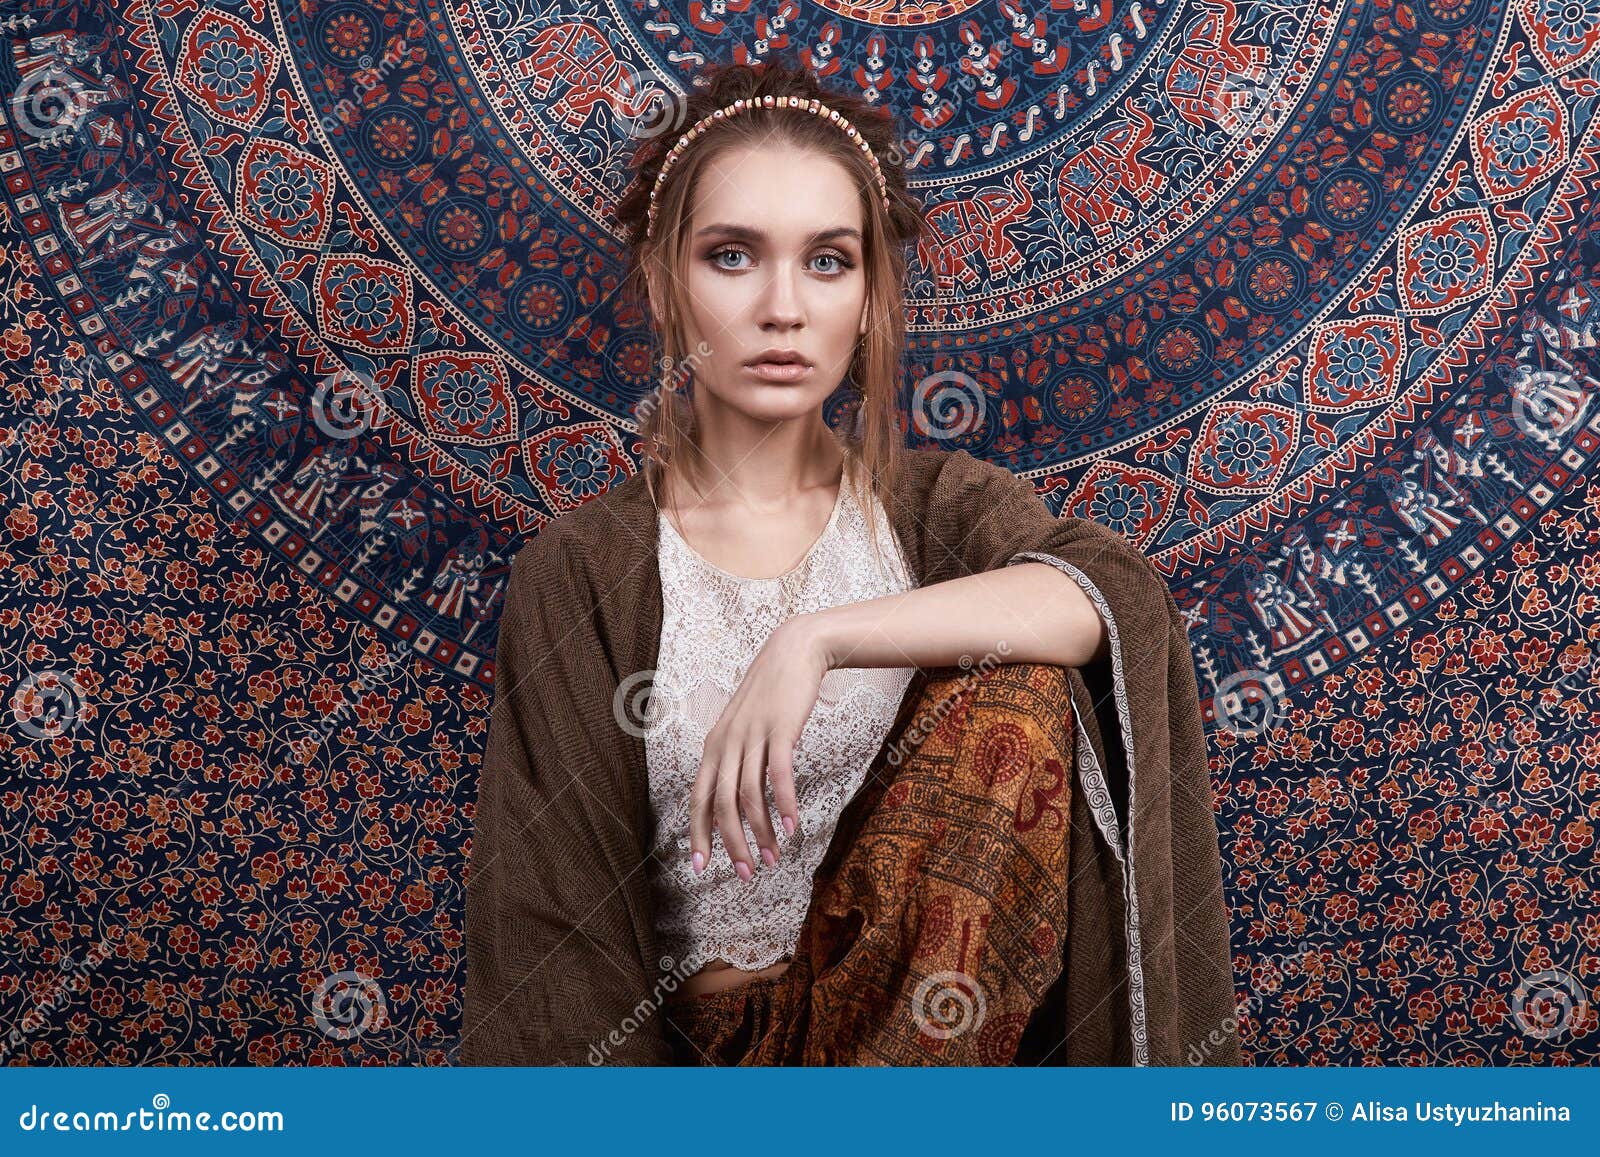 Indian Style Beauty Girl Over Patterns Stock Image - Image of fashion ...